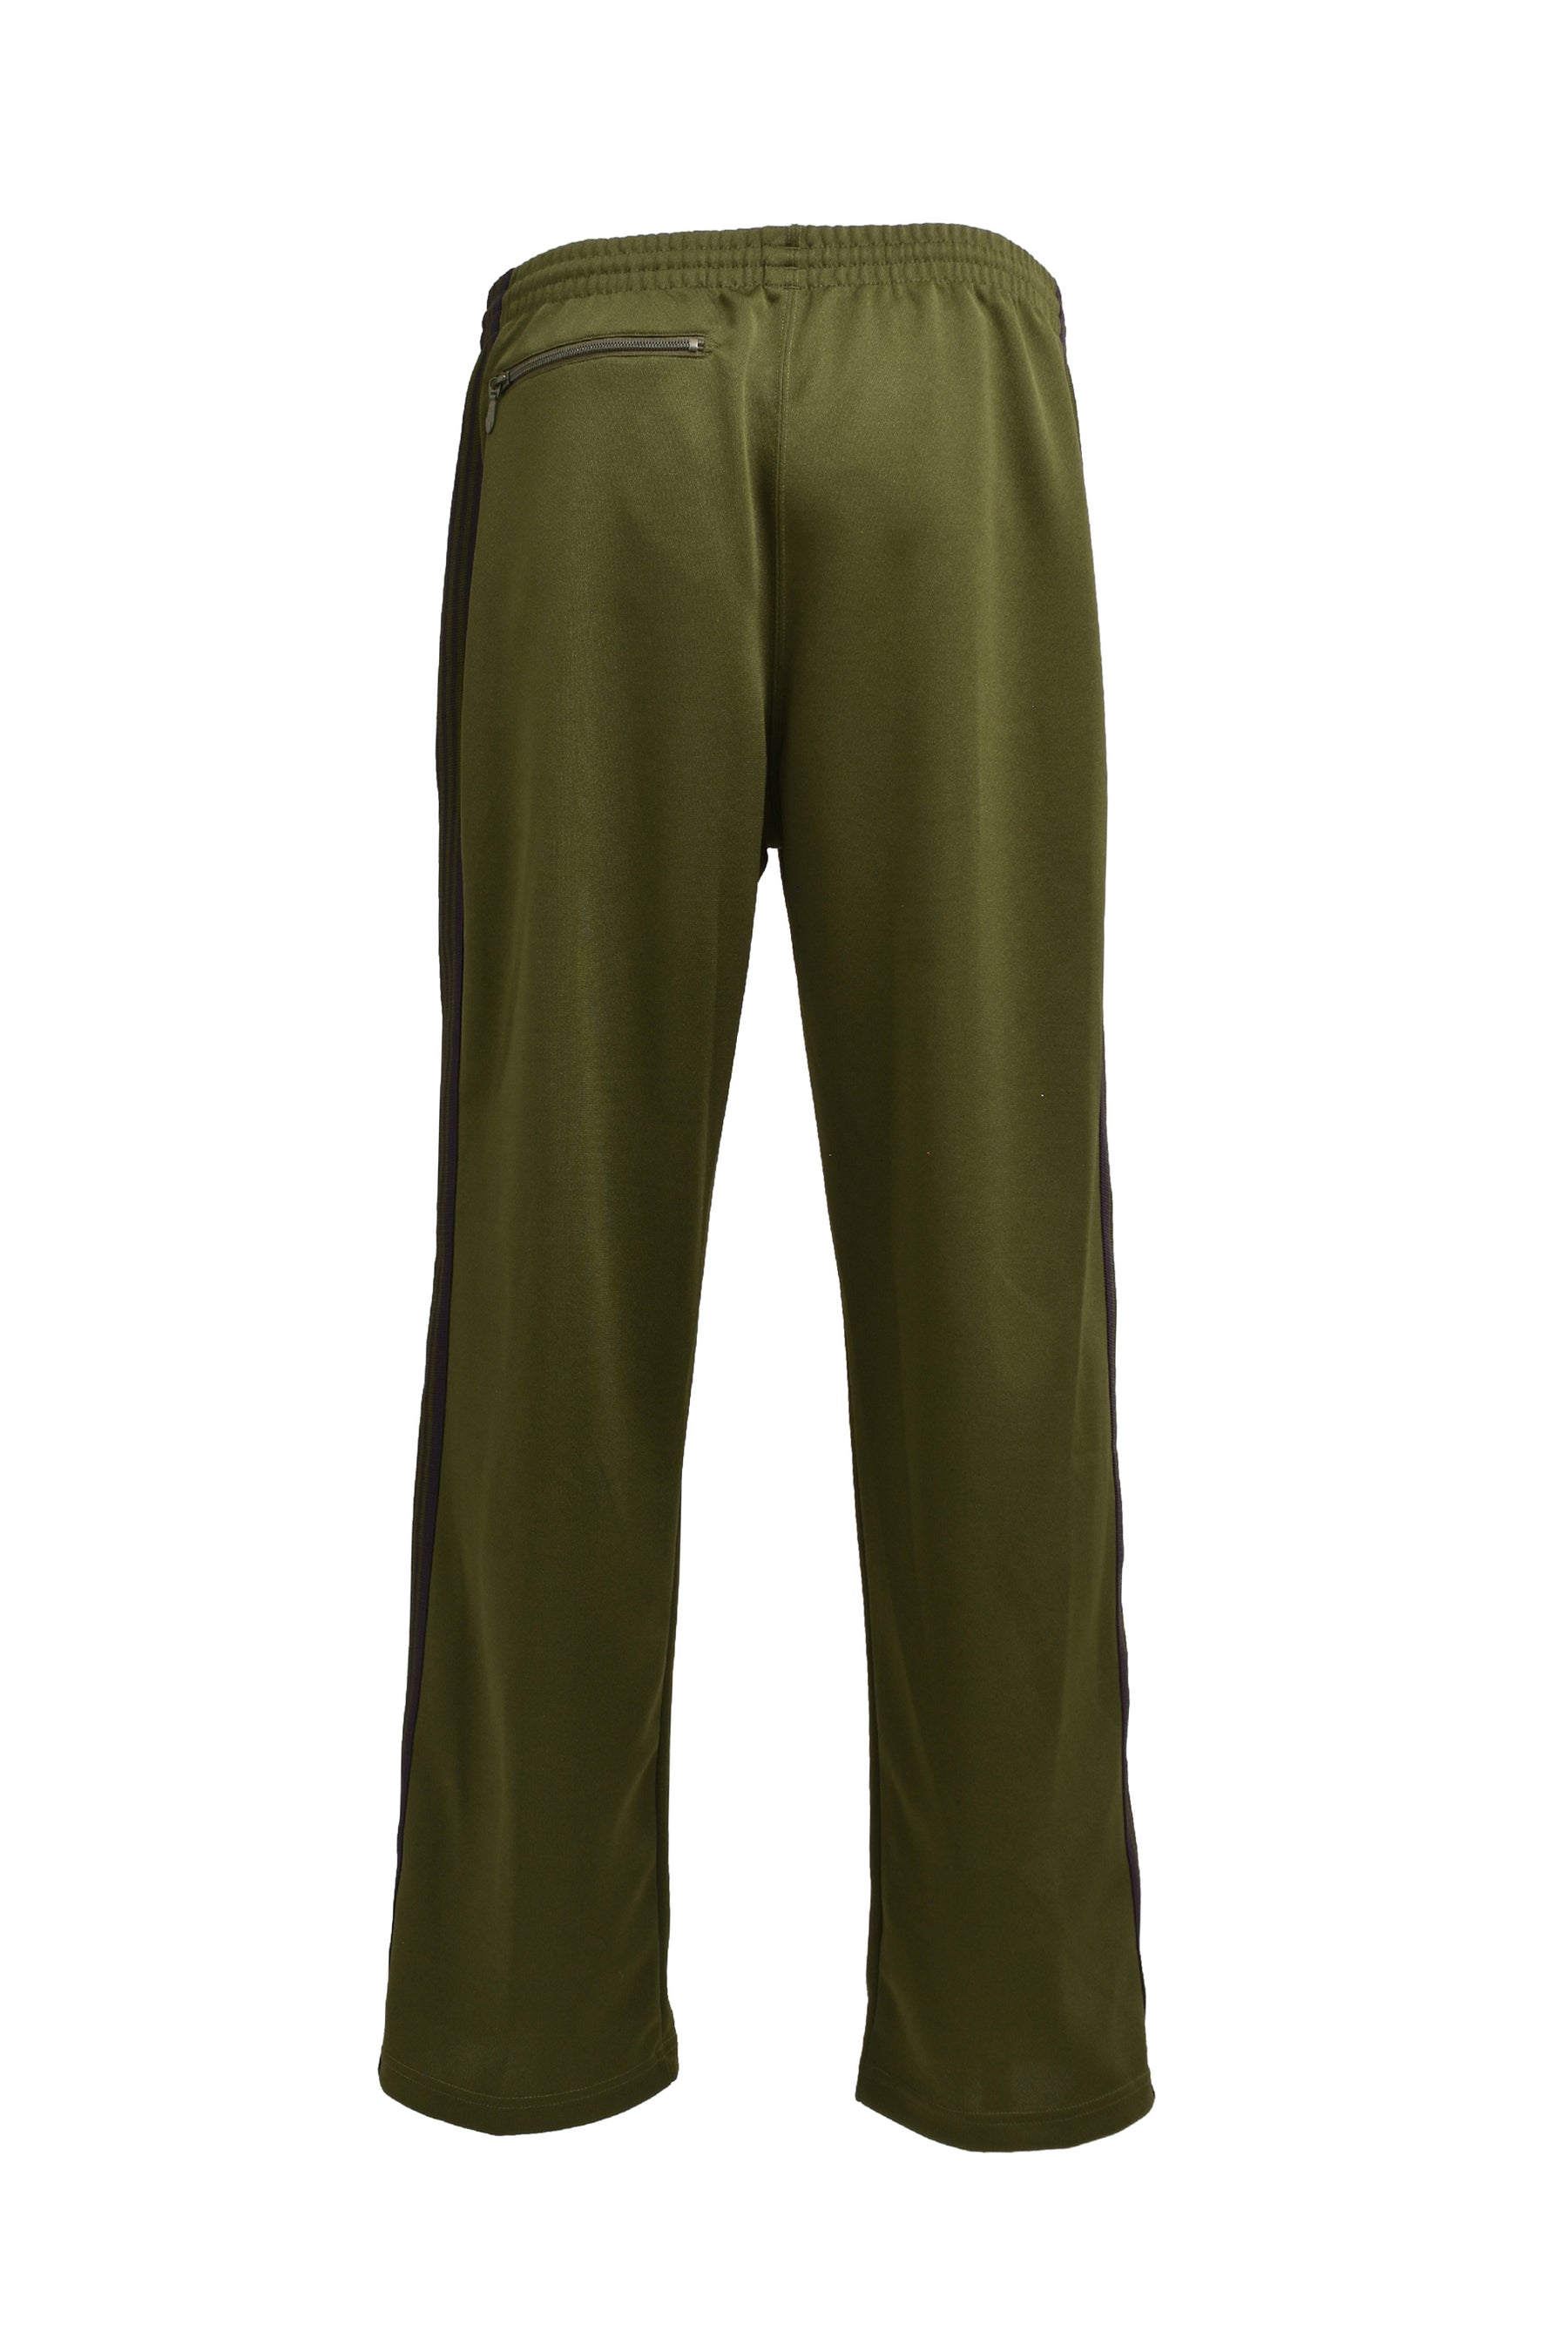 TRACK PANT - POLY SMOOTH / OLV